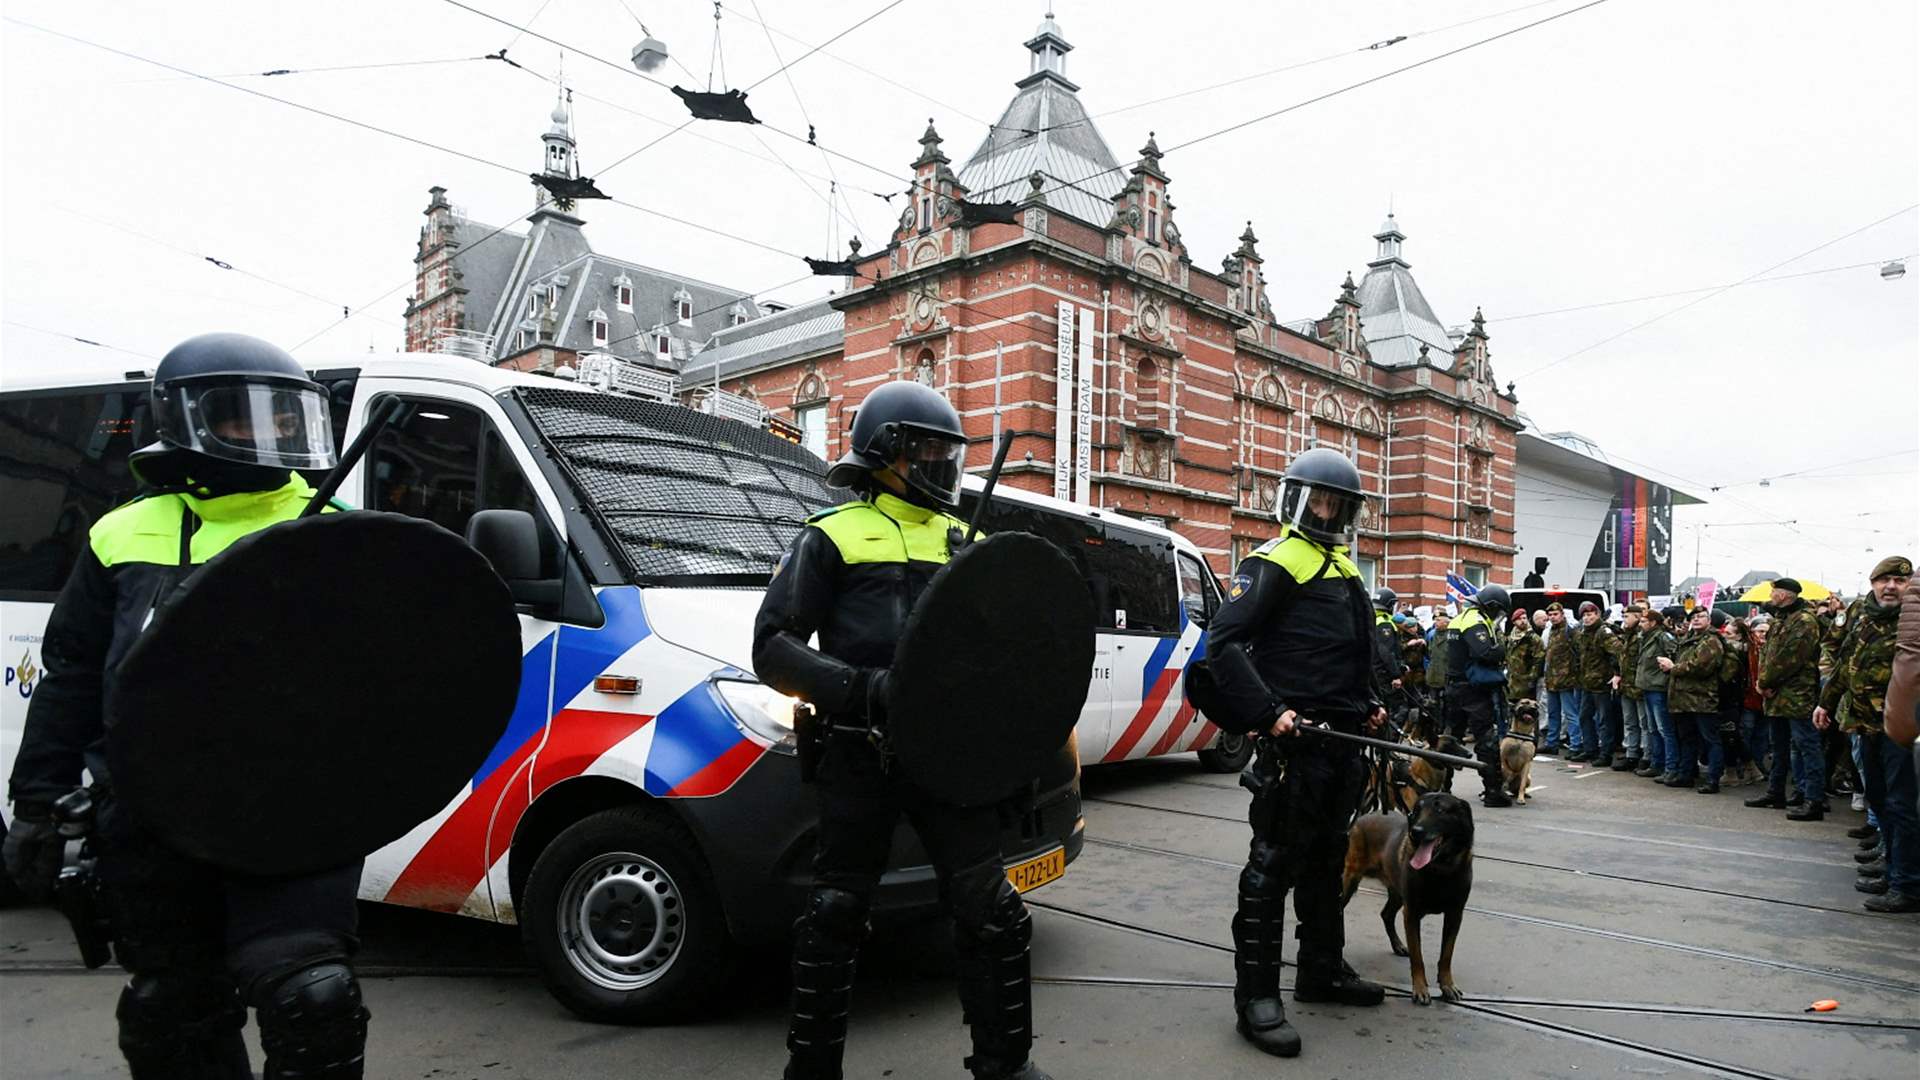 Dutch police states a burning object was thrown at Israeli embassy in the Hague 